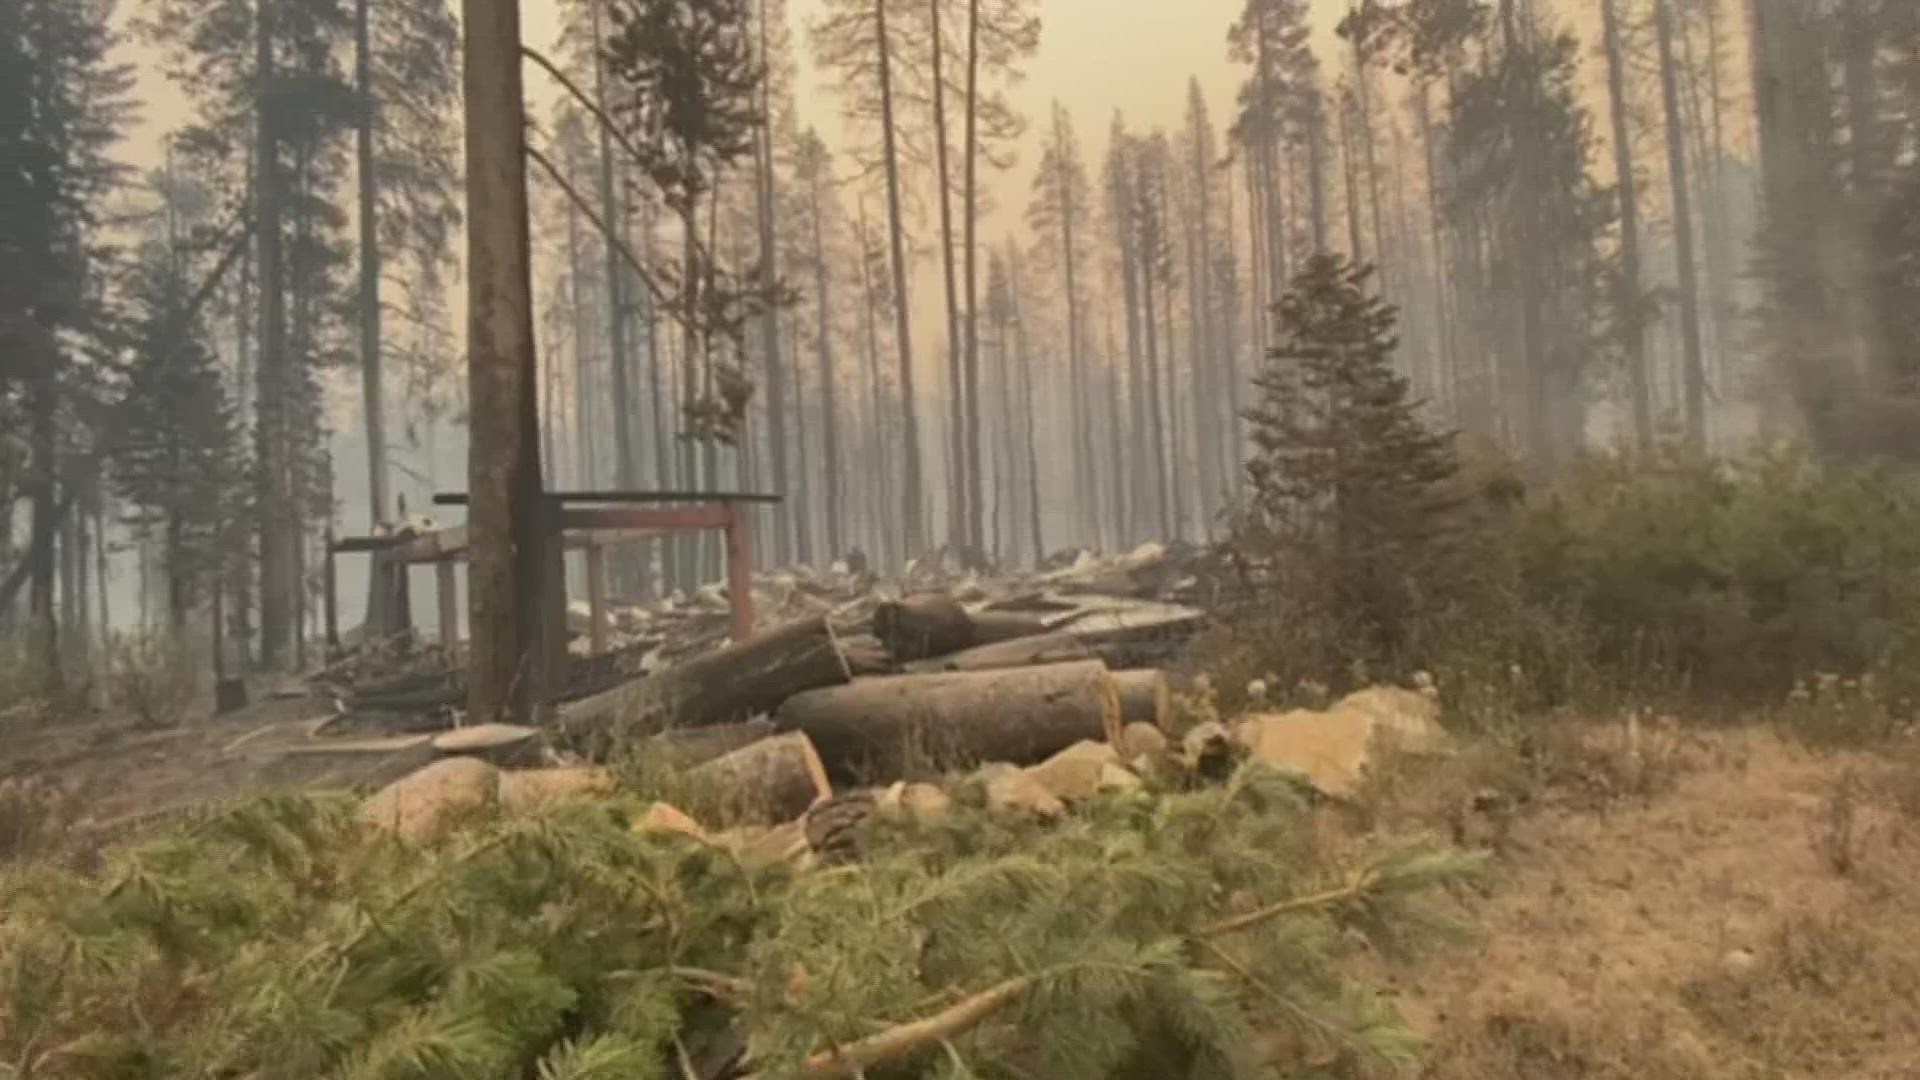 Vacation community near Alpine road in Tahoe wiped out.